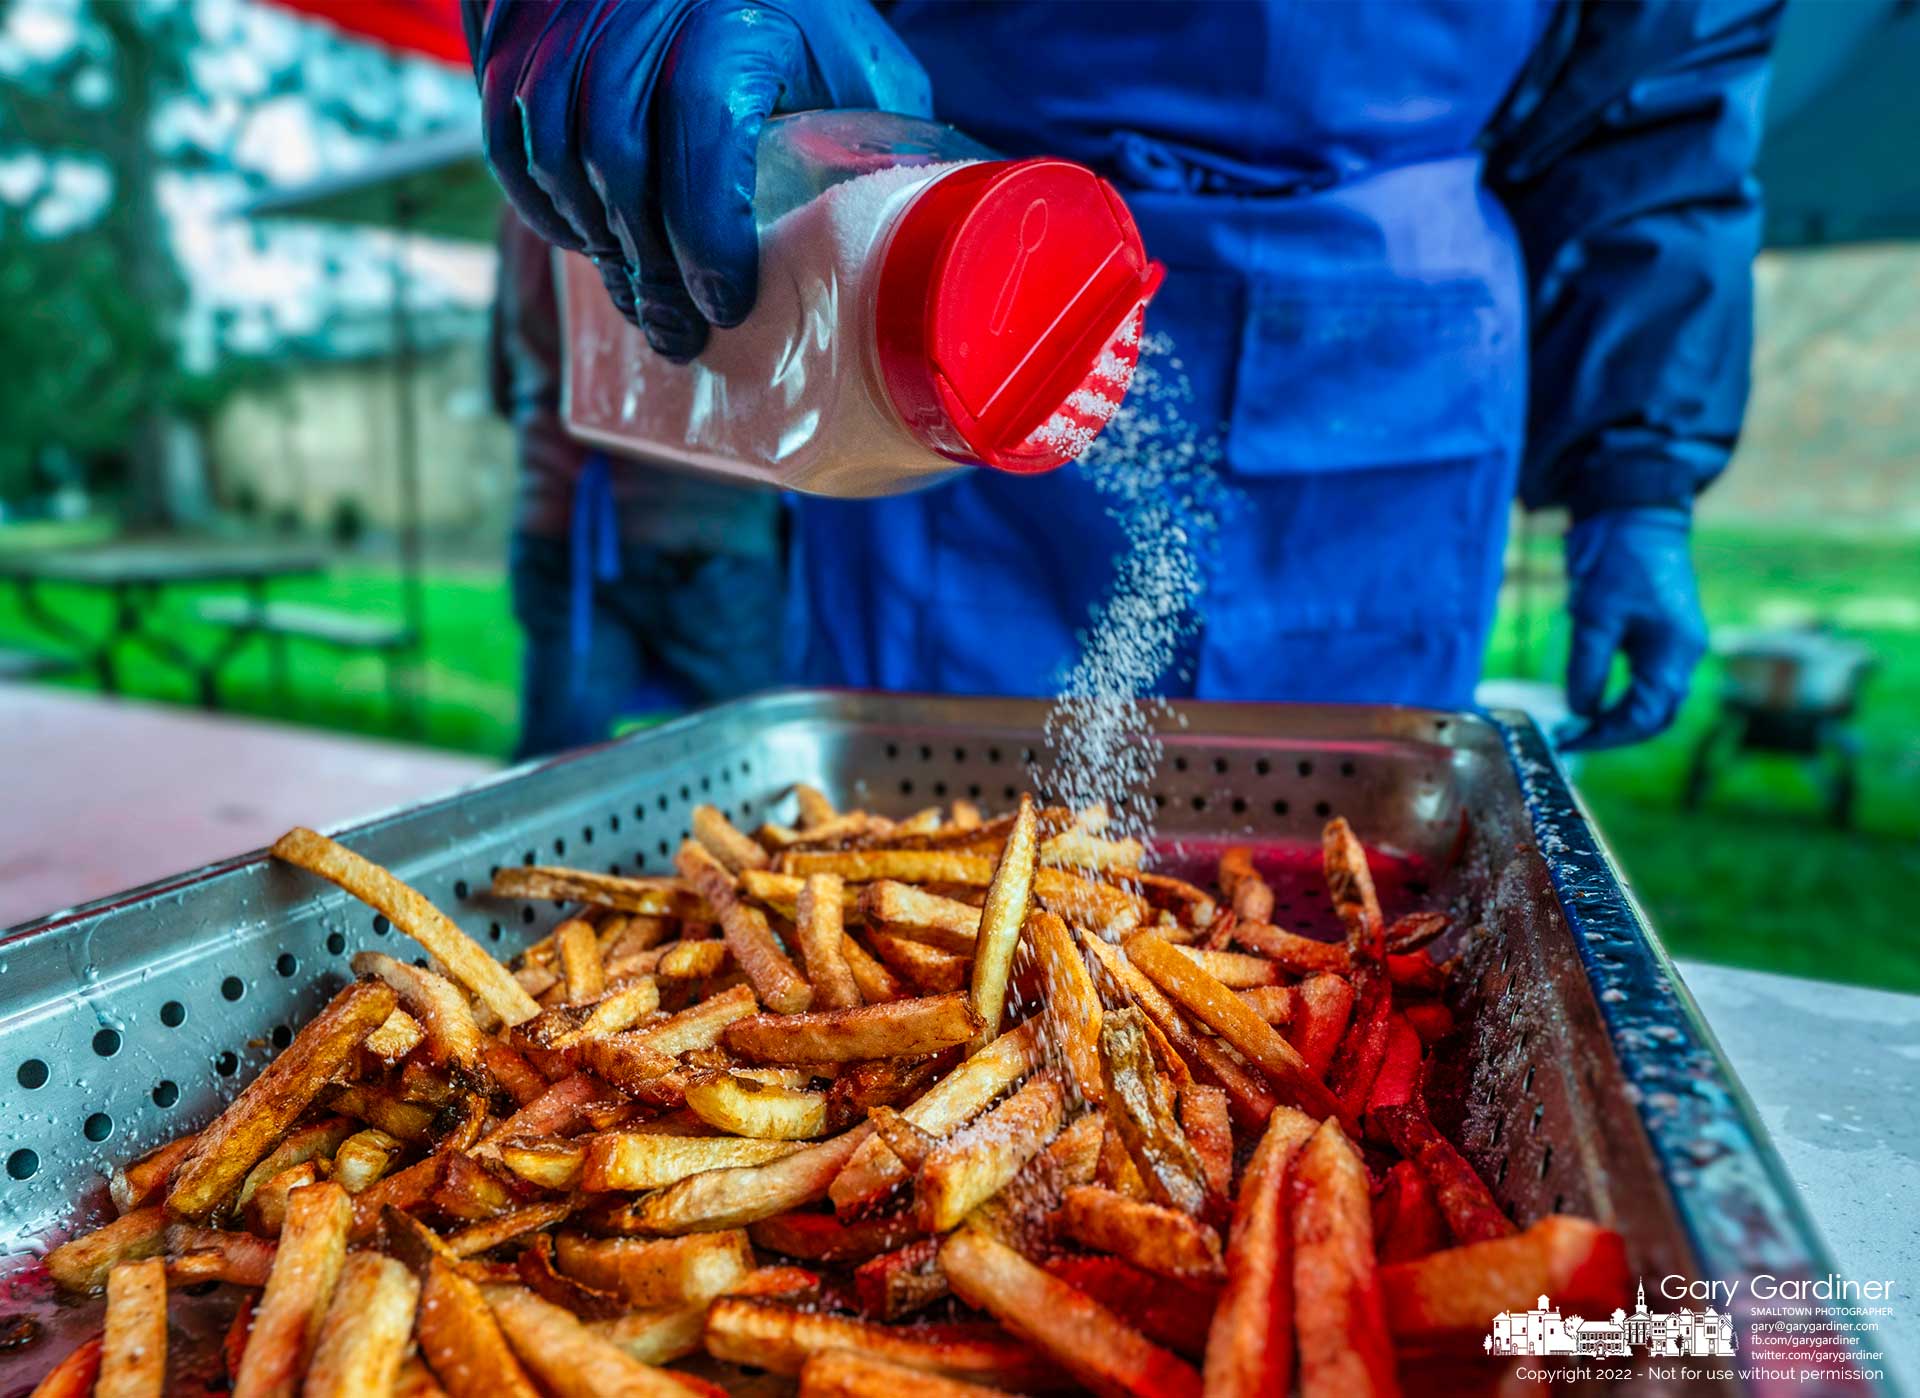 Handcut french-fried potatoes get a sprinkling of salt before joining the serving line at the Westerville Masonic Hall's annual fish fry to benefit Special Olympics. My Final Photo for April 8, 2022.